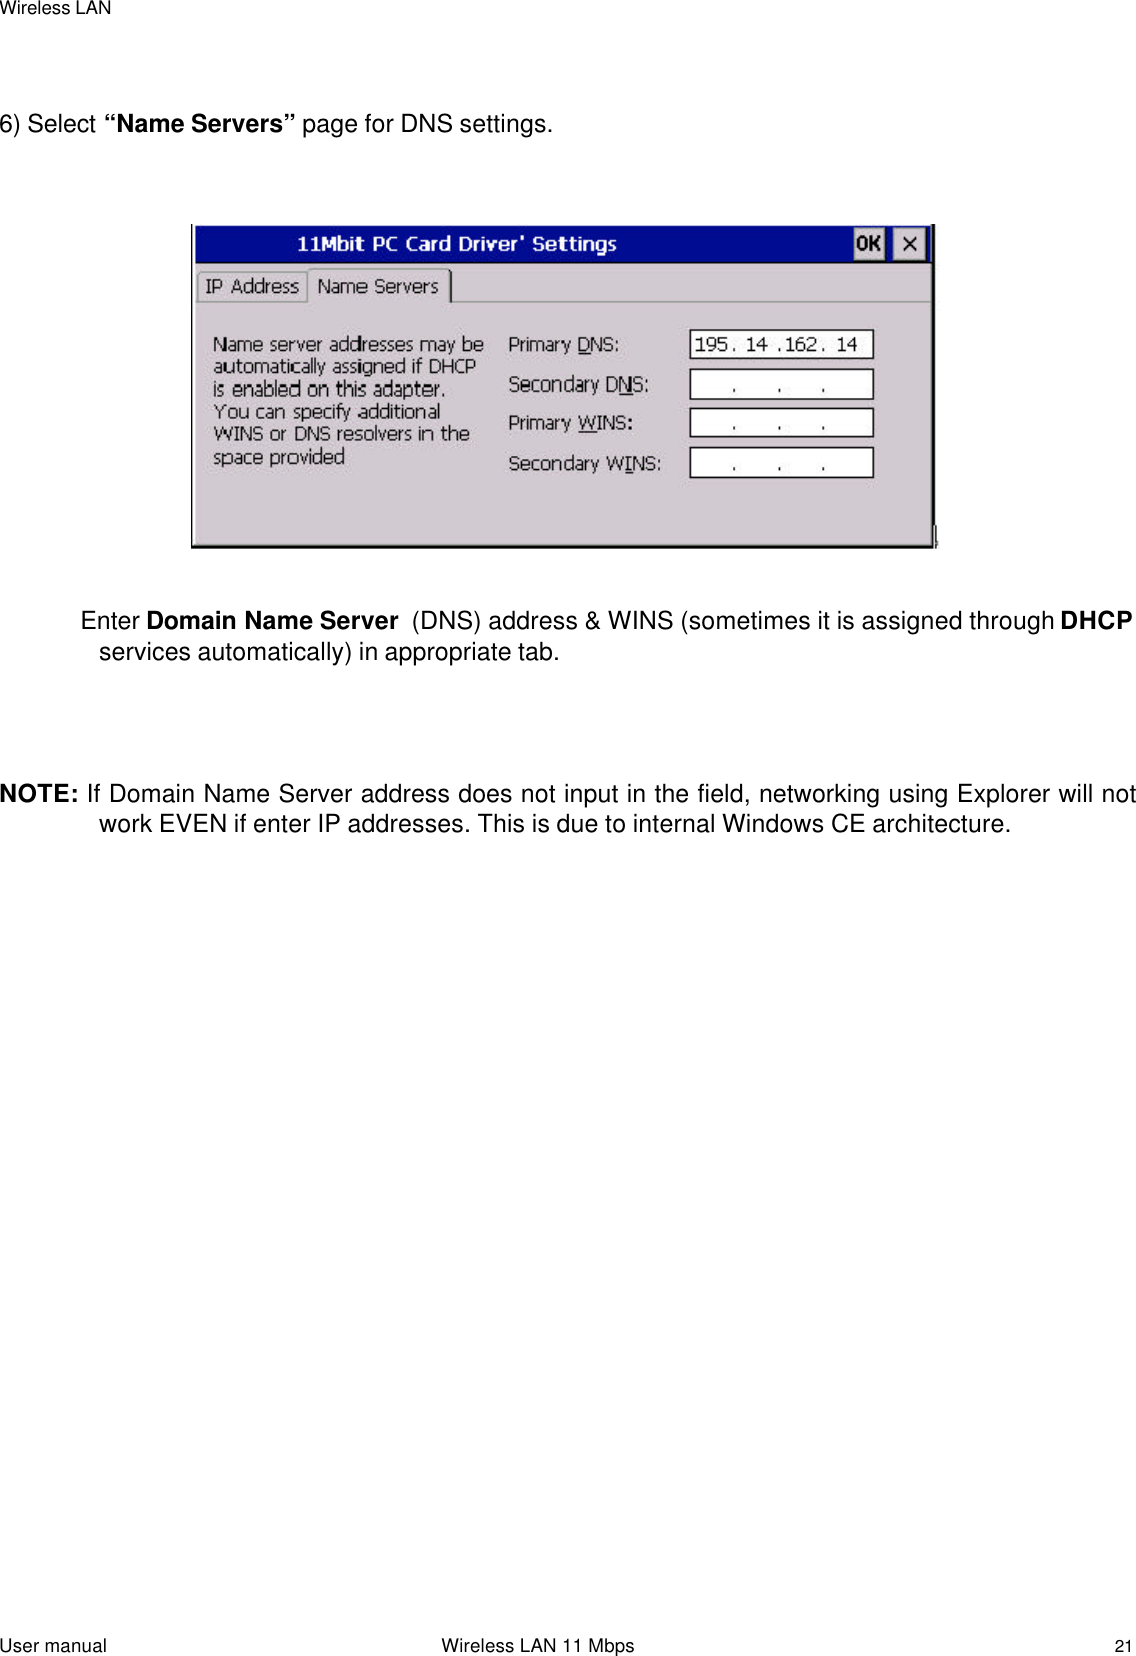 Wireless LANUser manual                                                                 Wireless LAN 11 Mbps216) Select “Name Servers” page for DNS settings. Enter Domain Name Server  (DNS) address &amp; WINS (sometimes it is assigned through DHCPservices automatically) in appropriate tab.NOTE: If Domain Name Server address does not input in the field, networking using Explorer will notwork EVEN if enter IP addresses. This is due to internal Windows CE architecture.